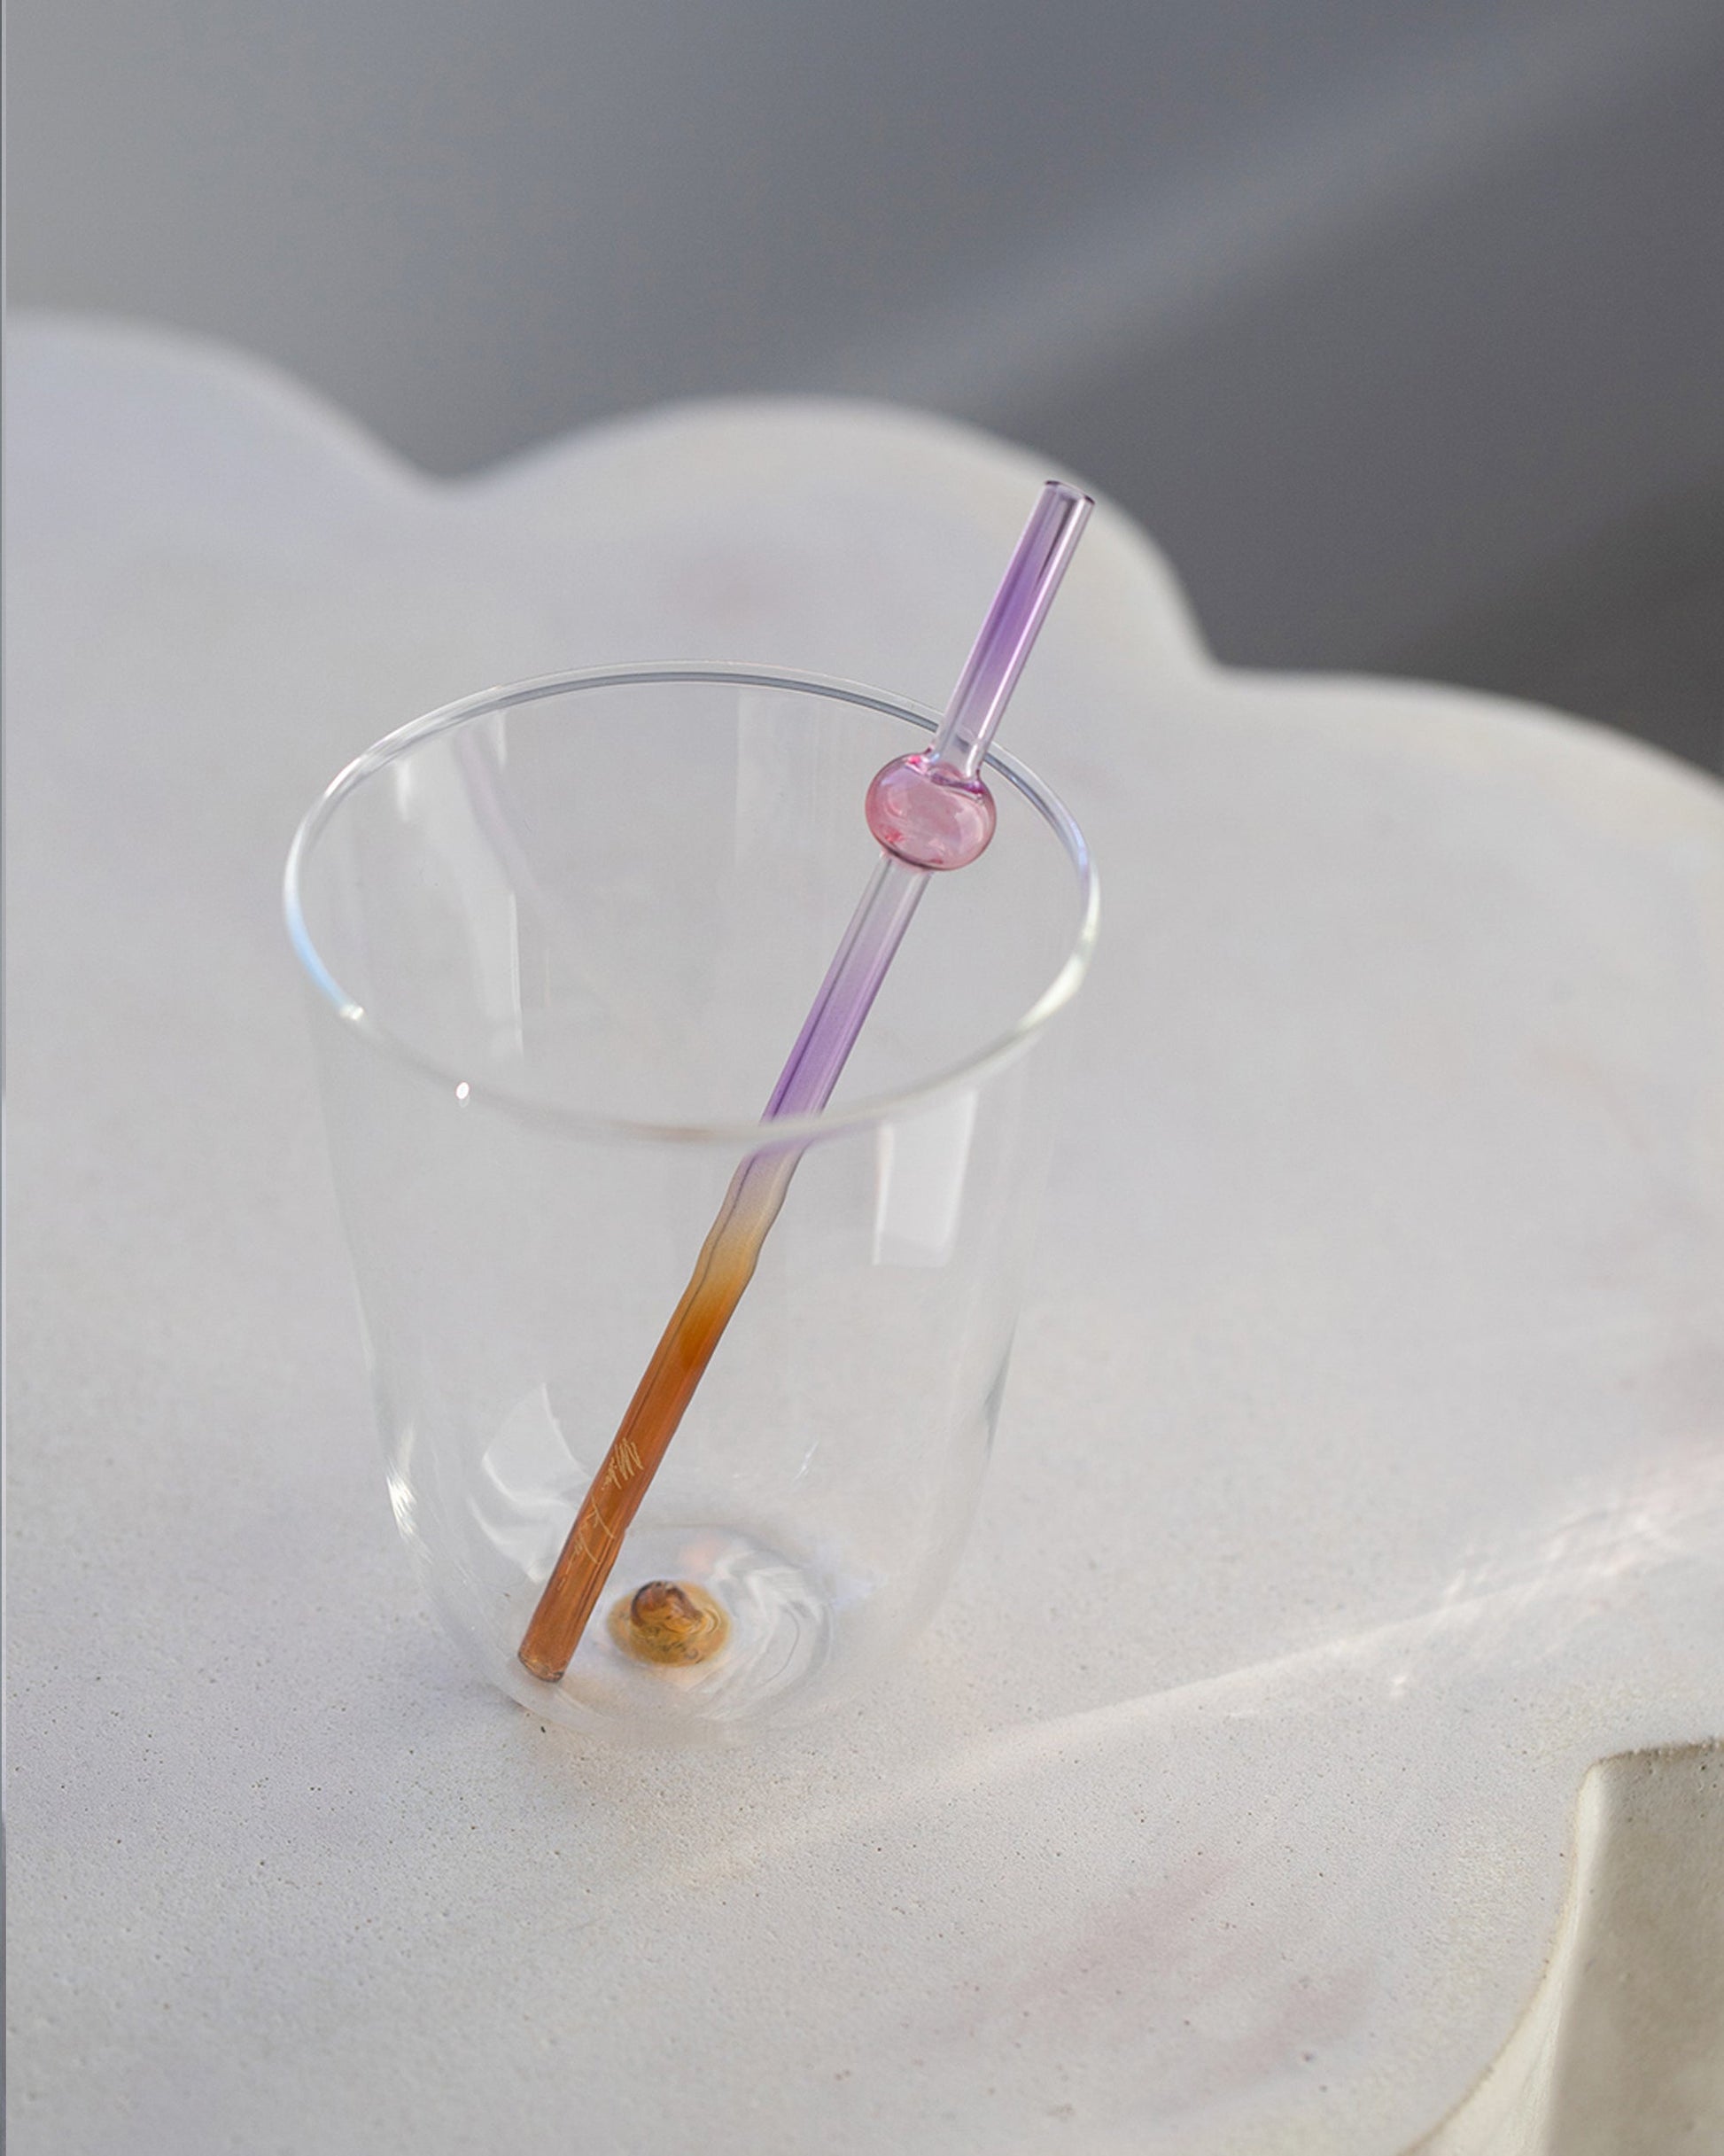 Styled image featuring Misha Kahn Purple and Orange Suck It Up Glass Cocktail Straw and Ichendorf Milano Amber Long Drink Glass on light color background.